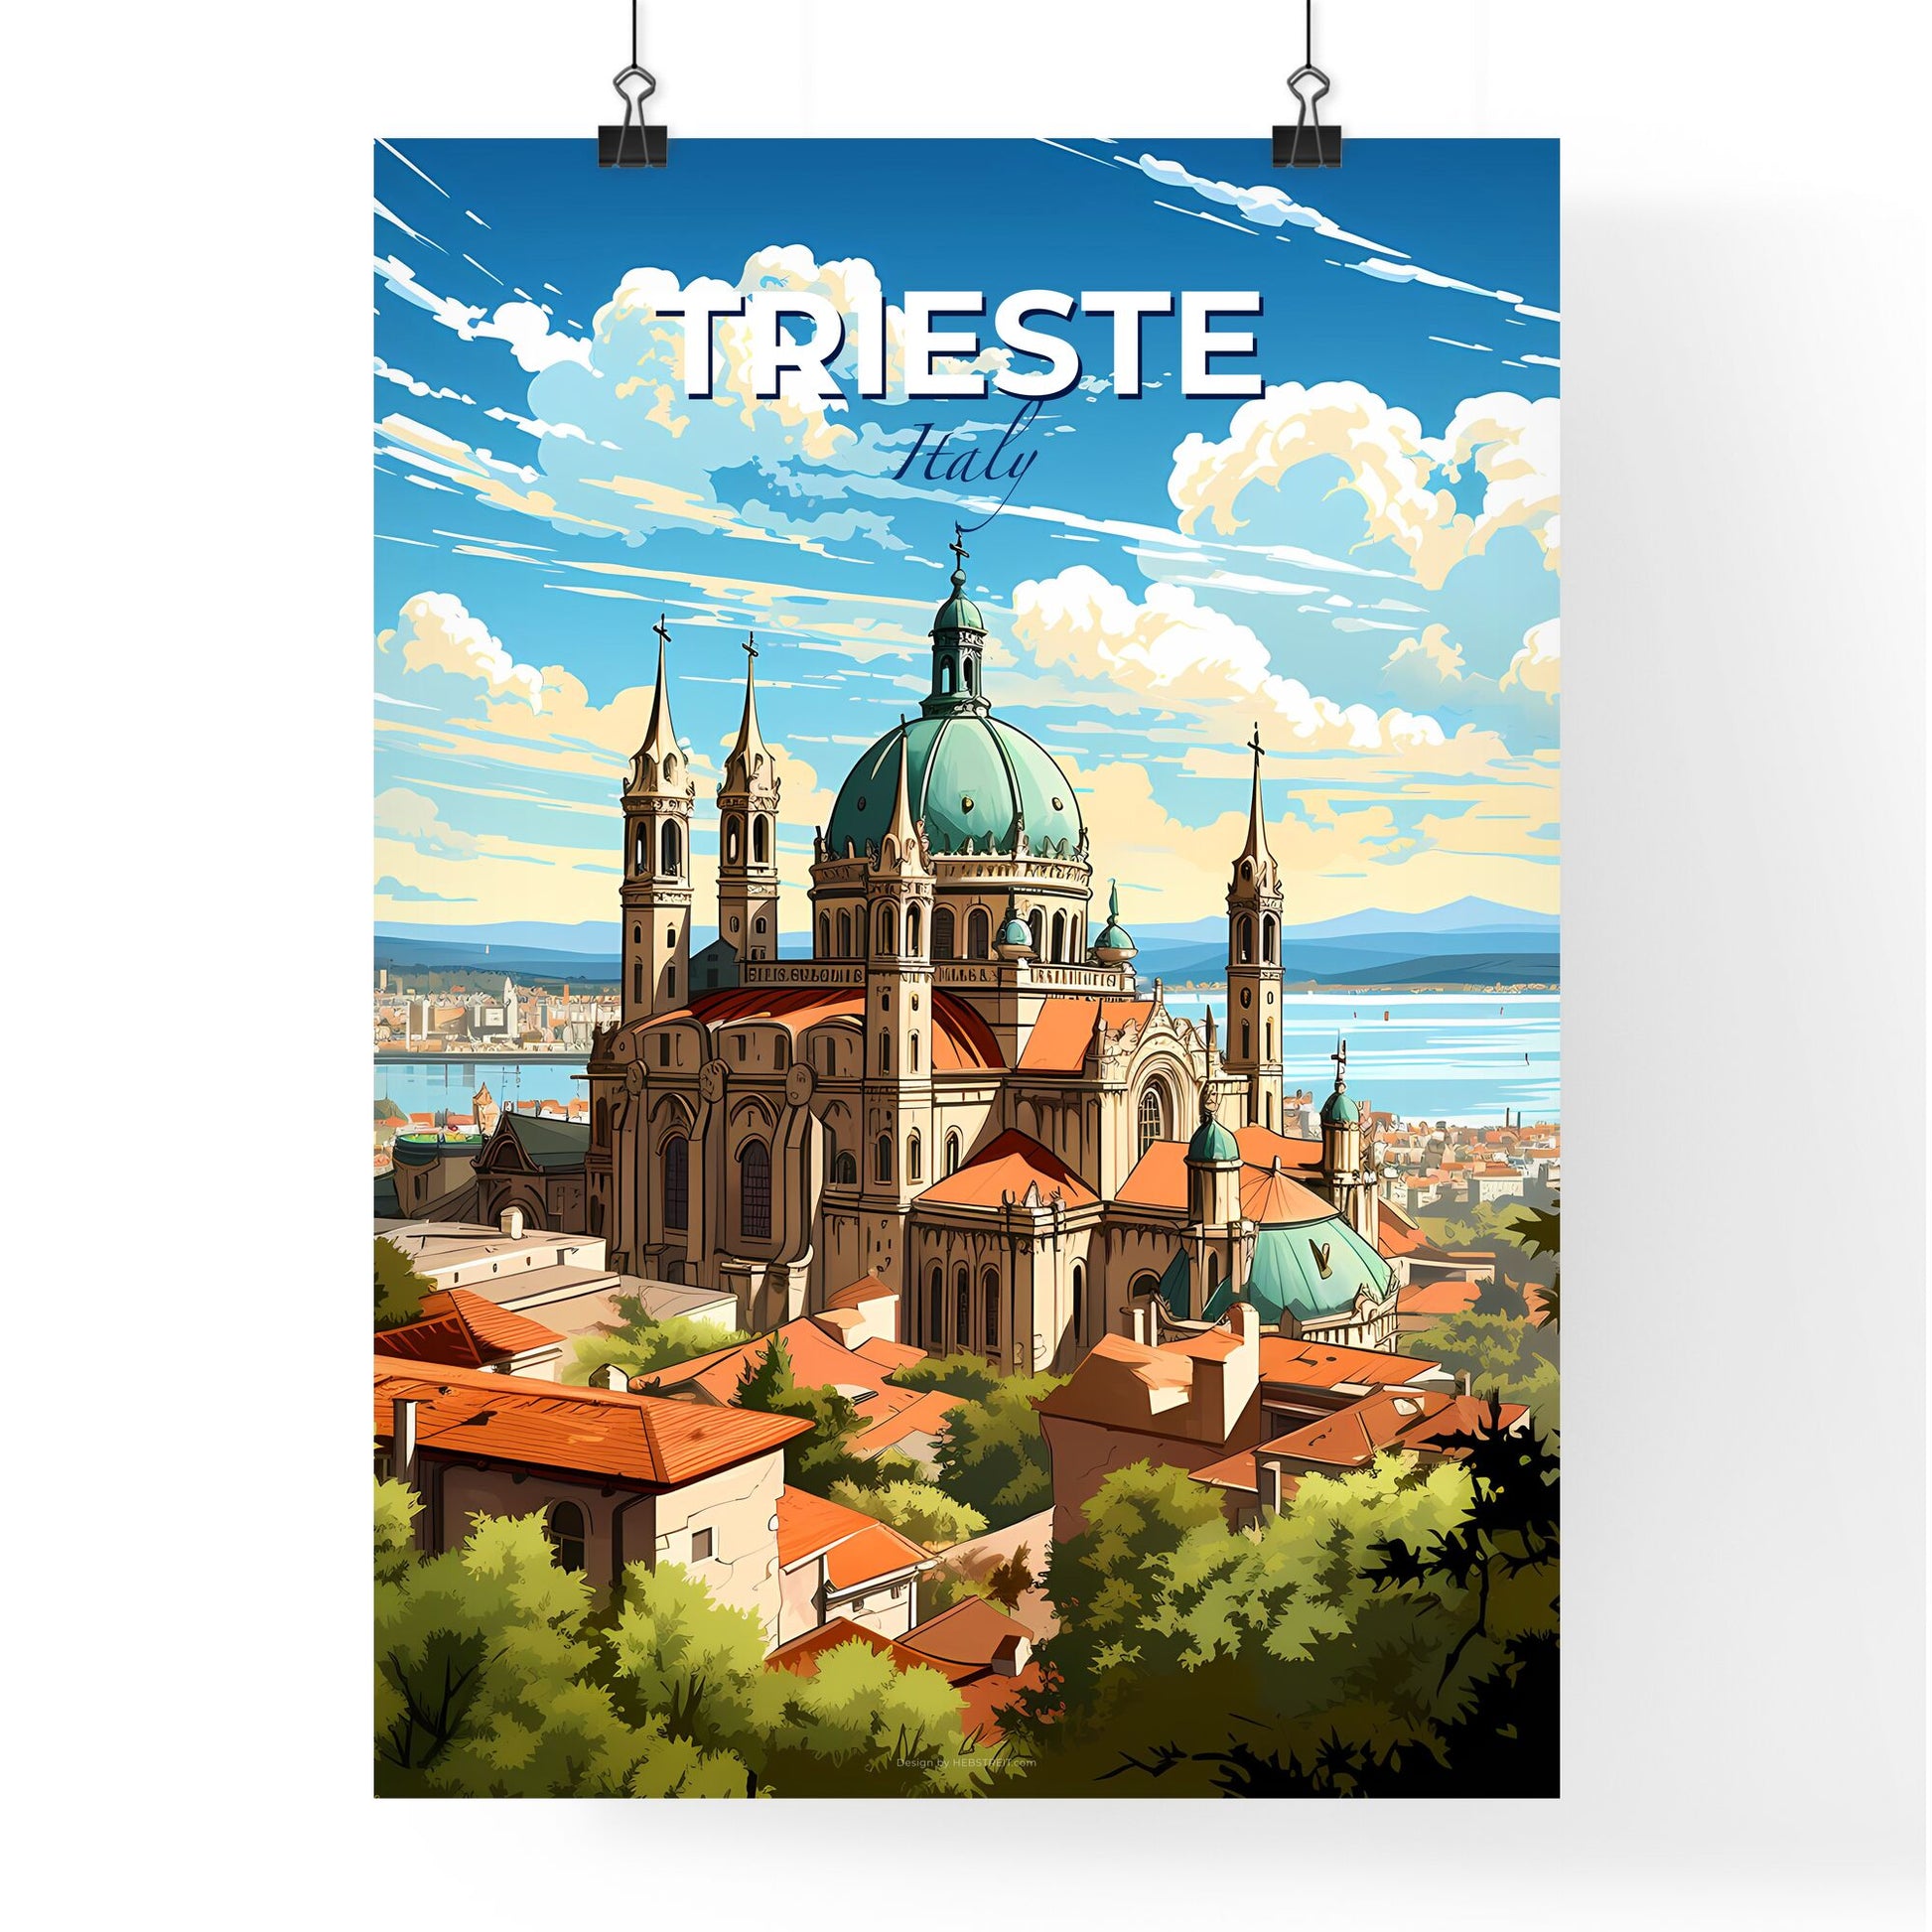 Trieste, Italy, A Poster of a large building with a blue dome and red roofs Default Title